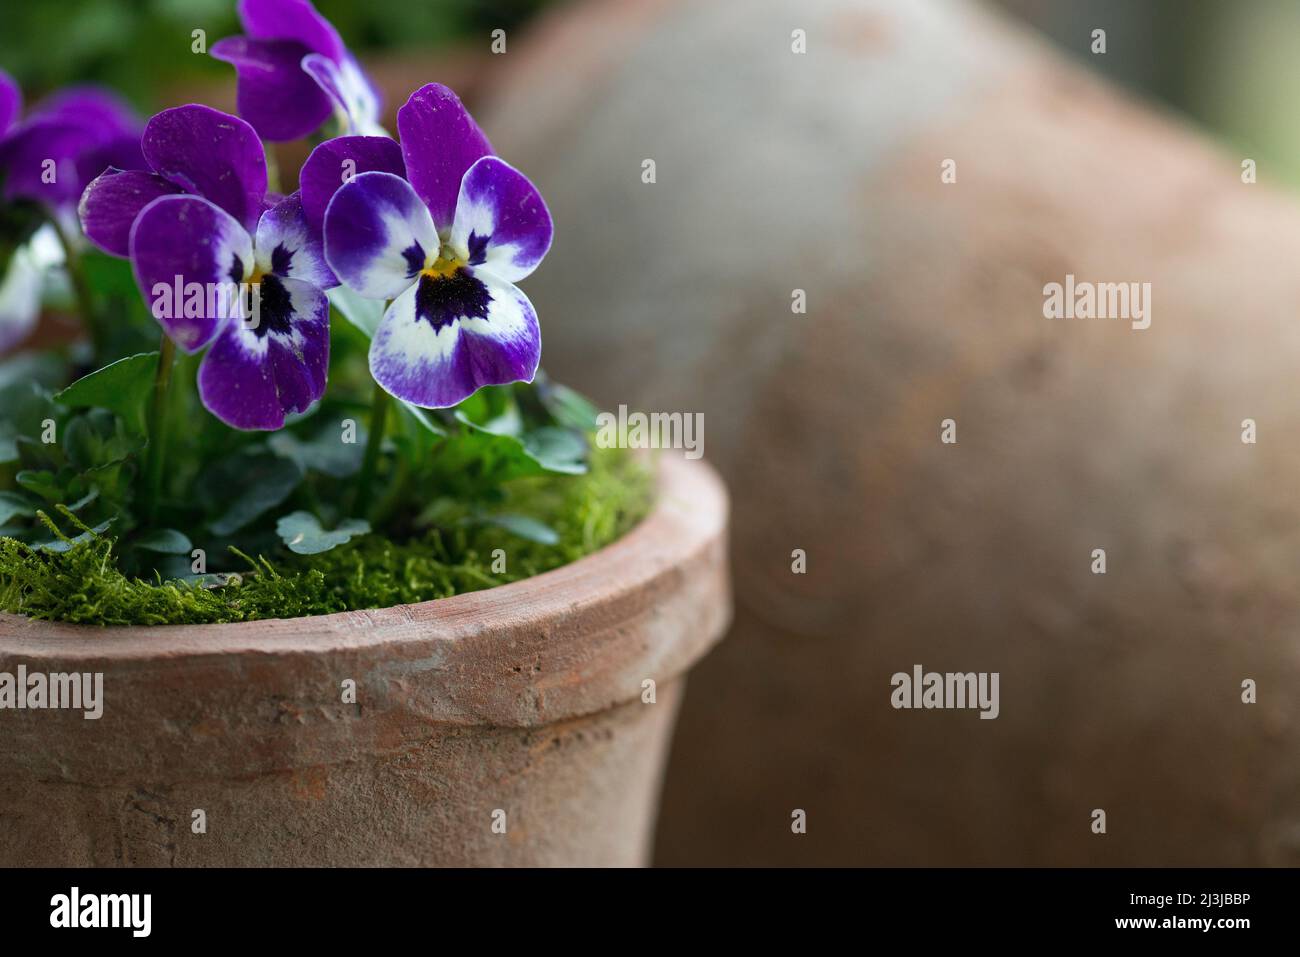 Horned violet (Viola cornuta) in a pot, flowers in purple and white Stock Photo